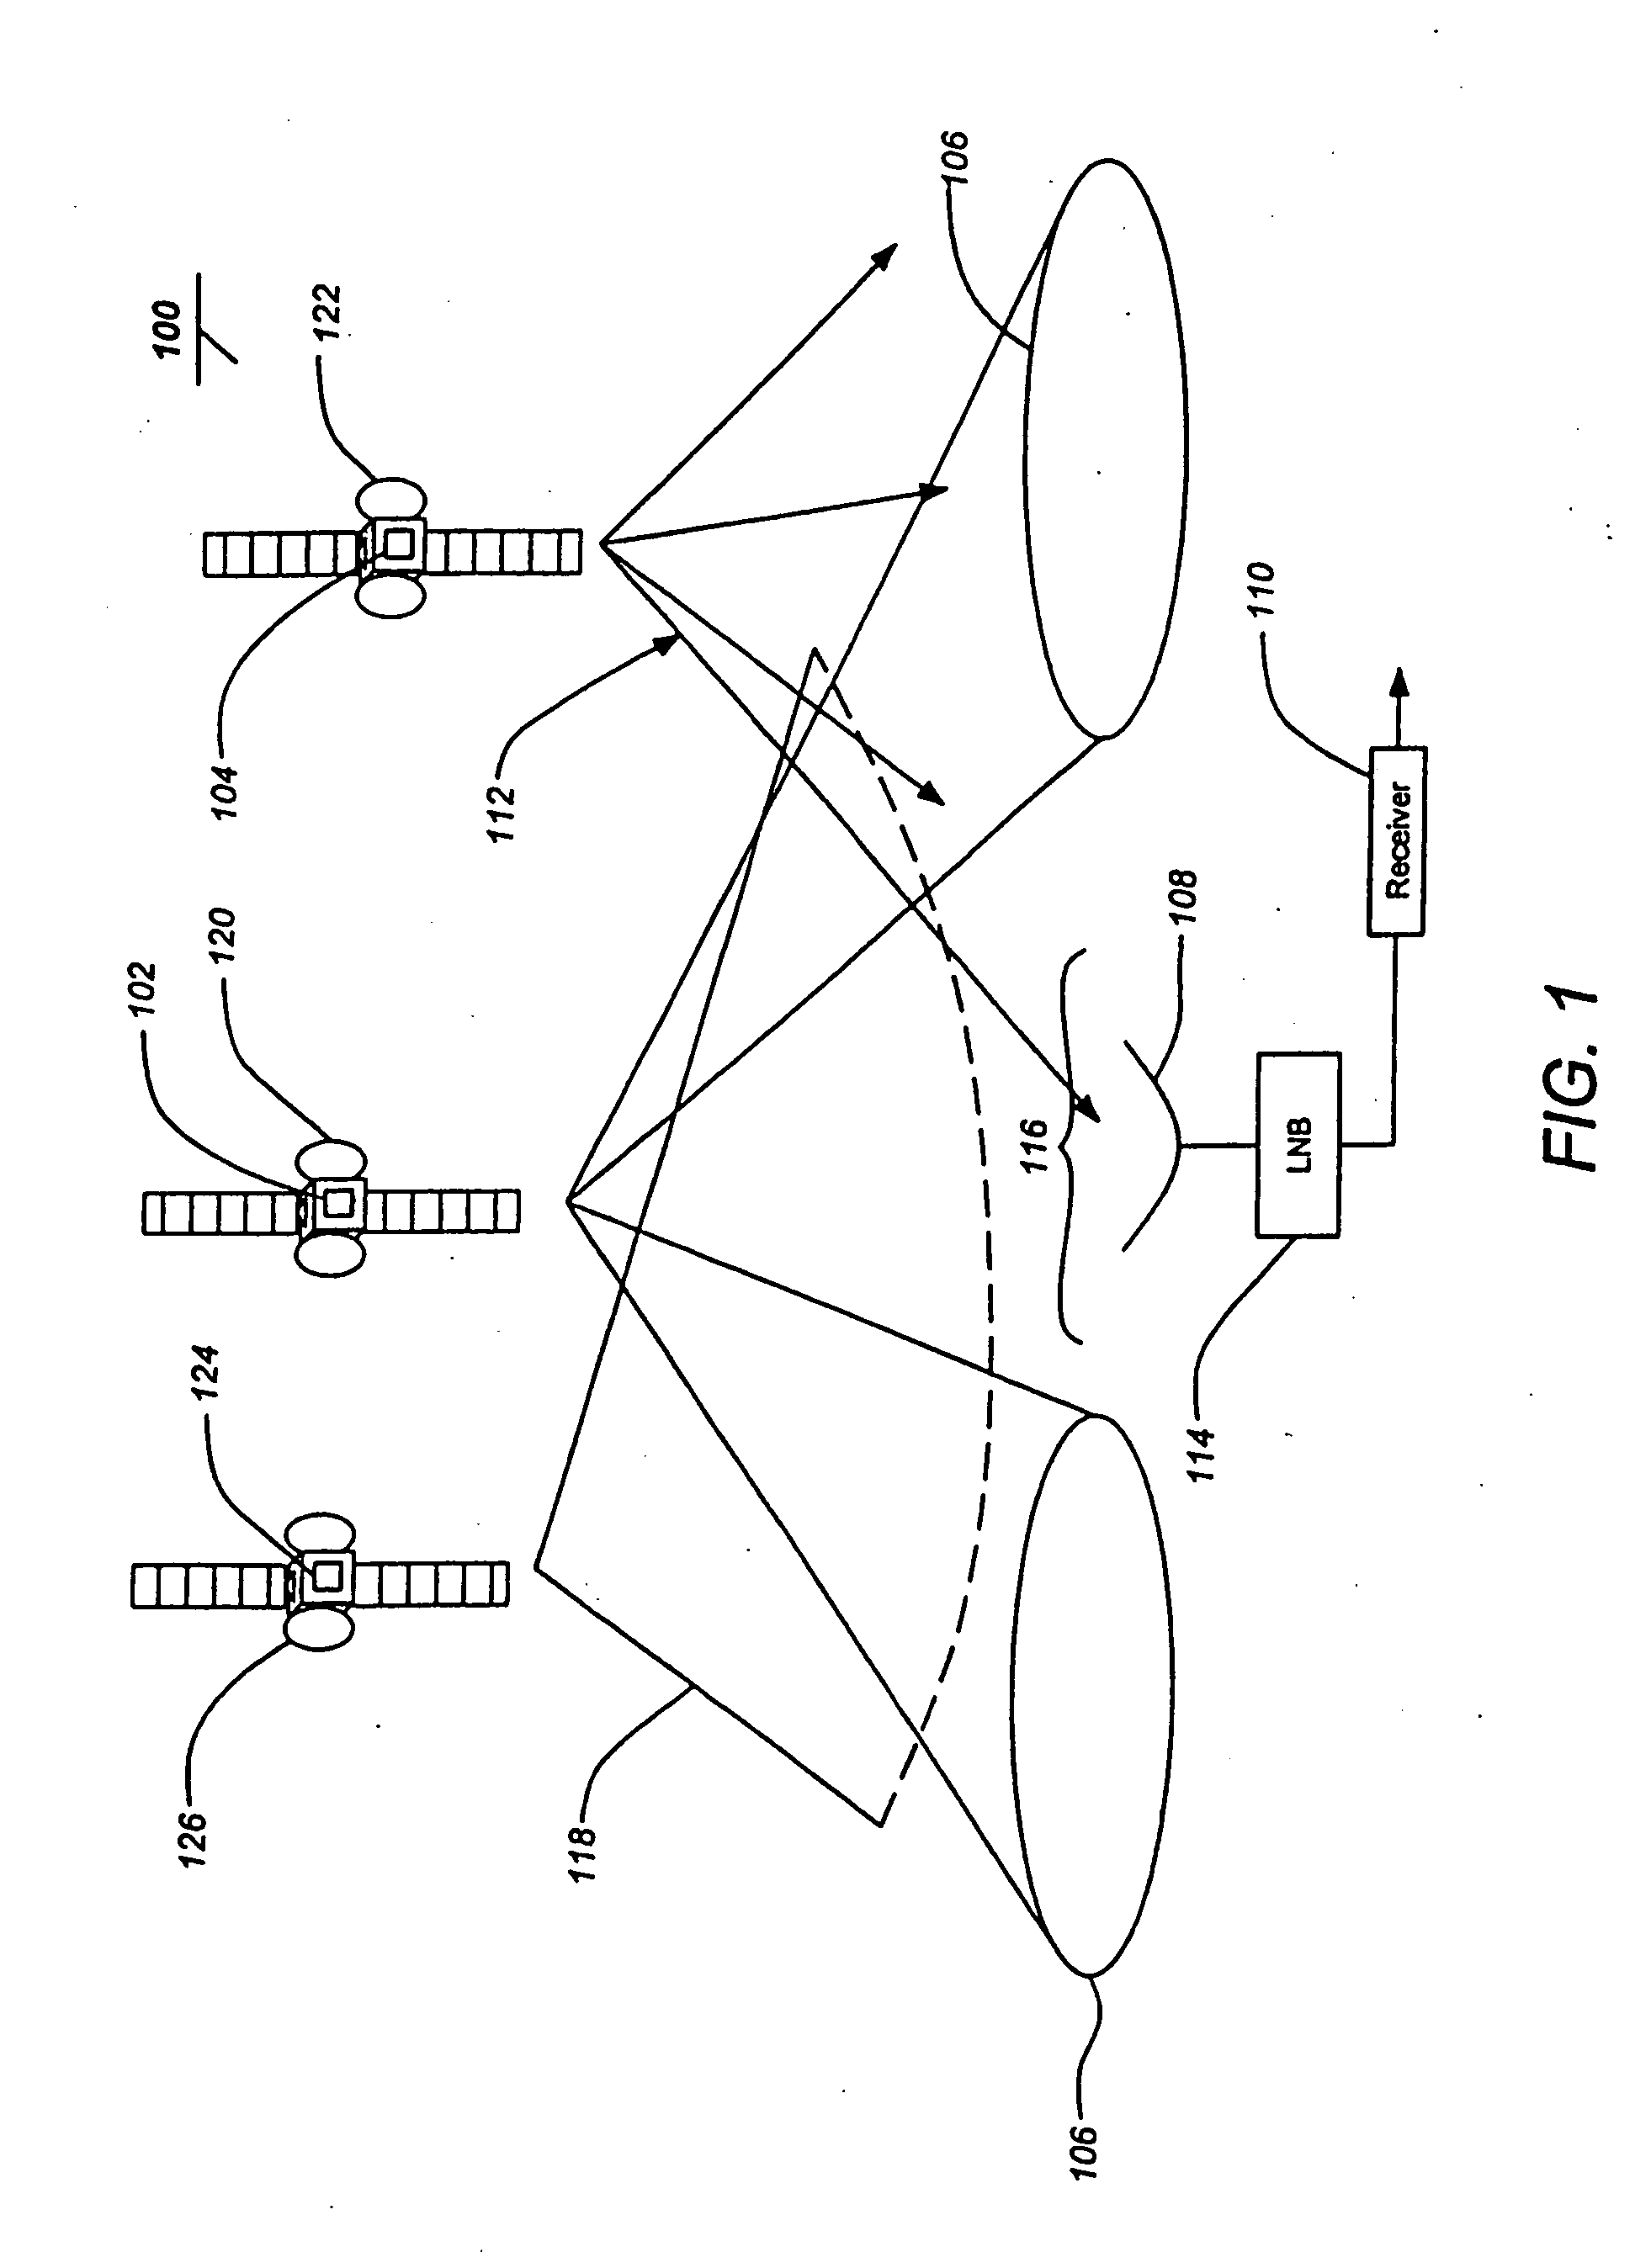 Device and method to locally fill gaps in spotbeam satellite systems with frequency re-use